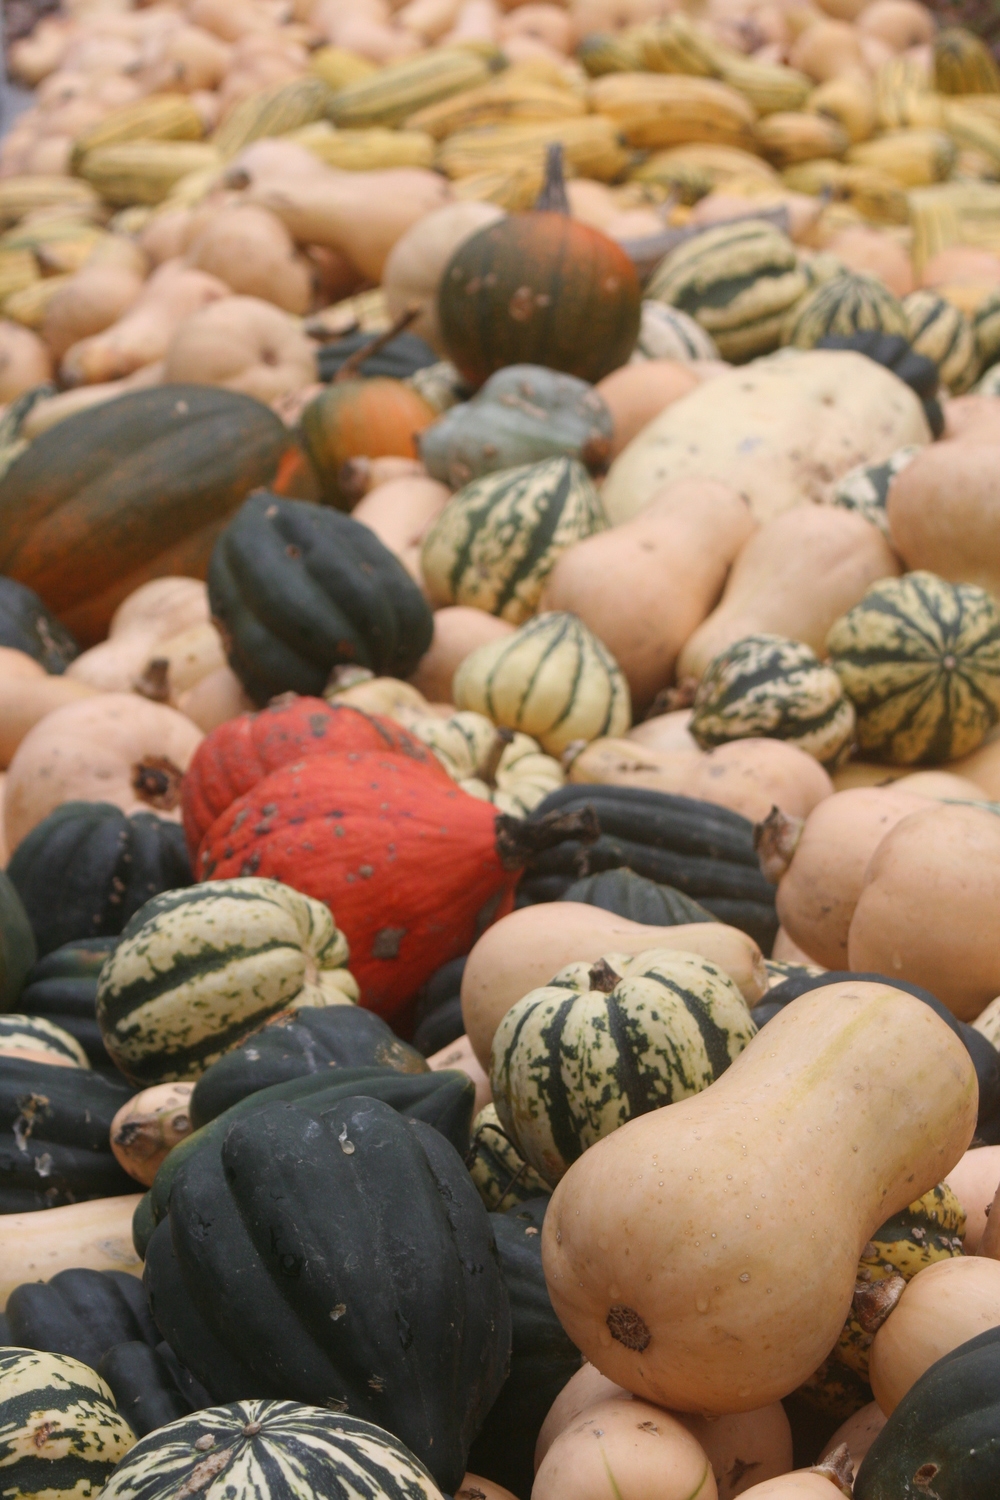 Over 11,000 pounds of winter squash recovered